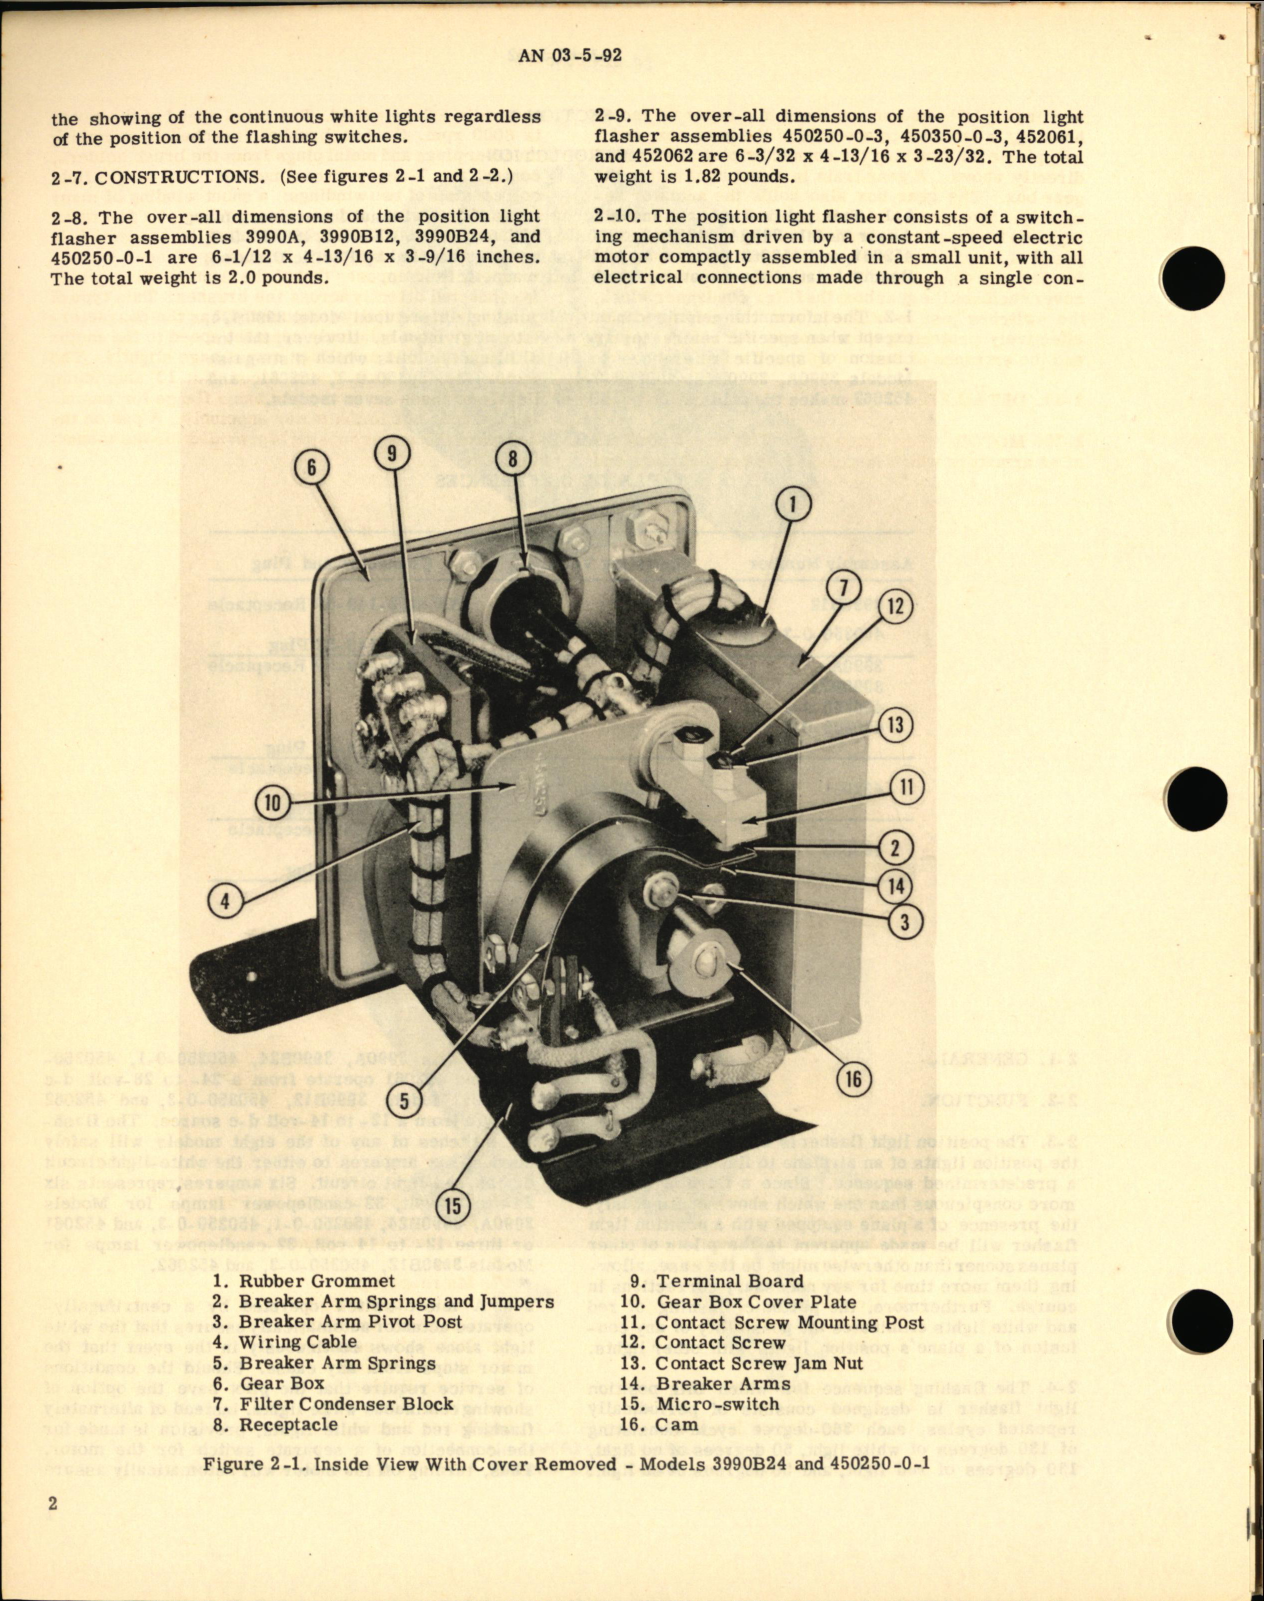 Sample page 6 from AirCorps Library document: Overhaul Instructions for Position Light Flashers